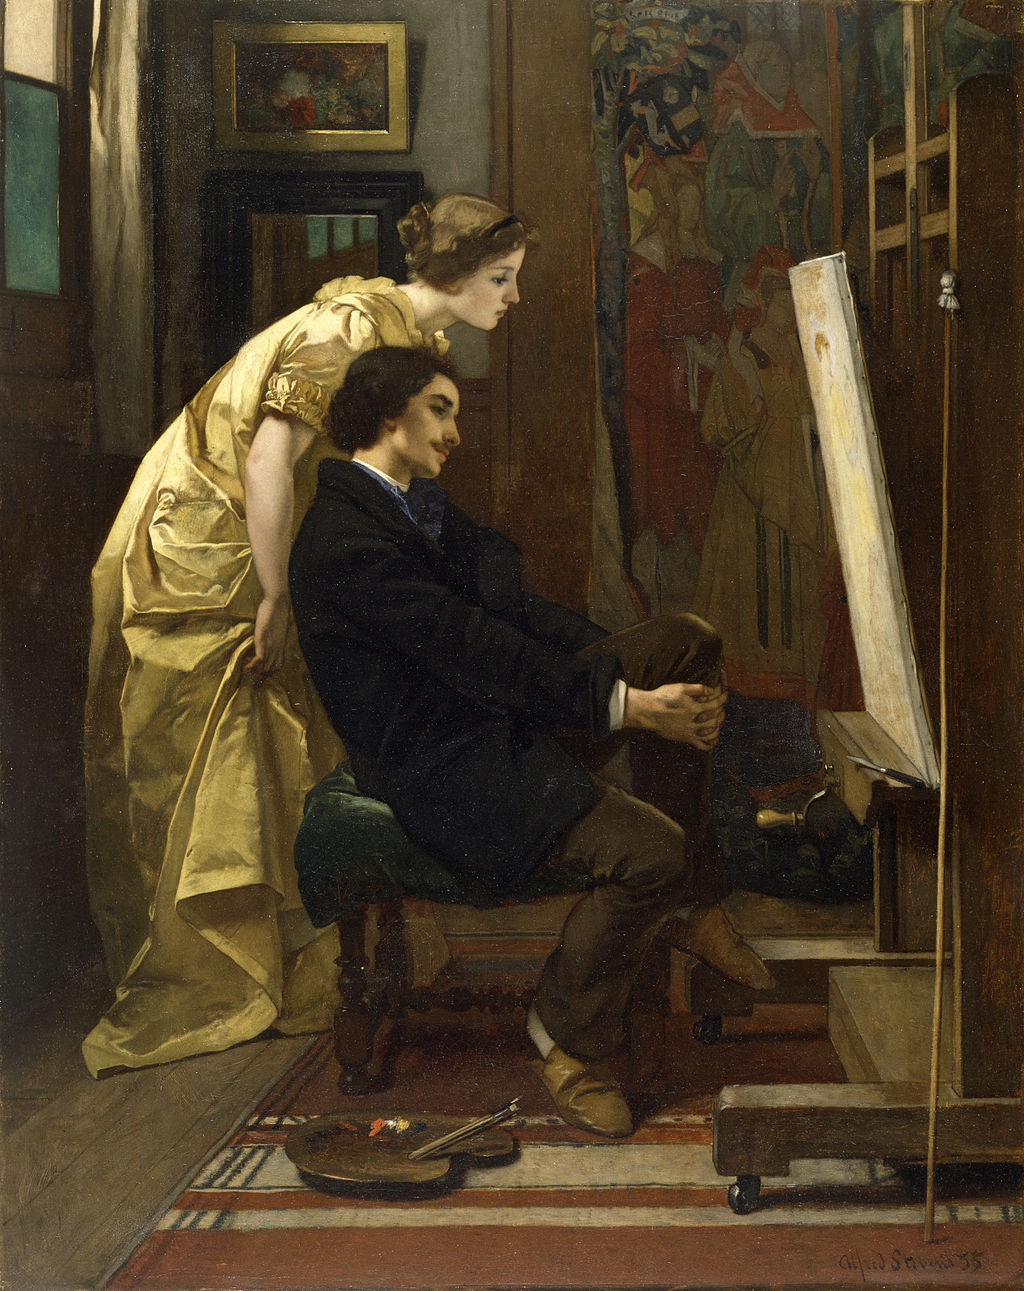 The Painter and His Model, 1855, by Alfred Stevens